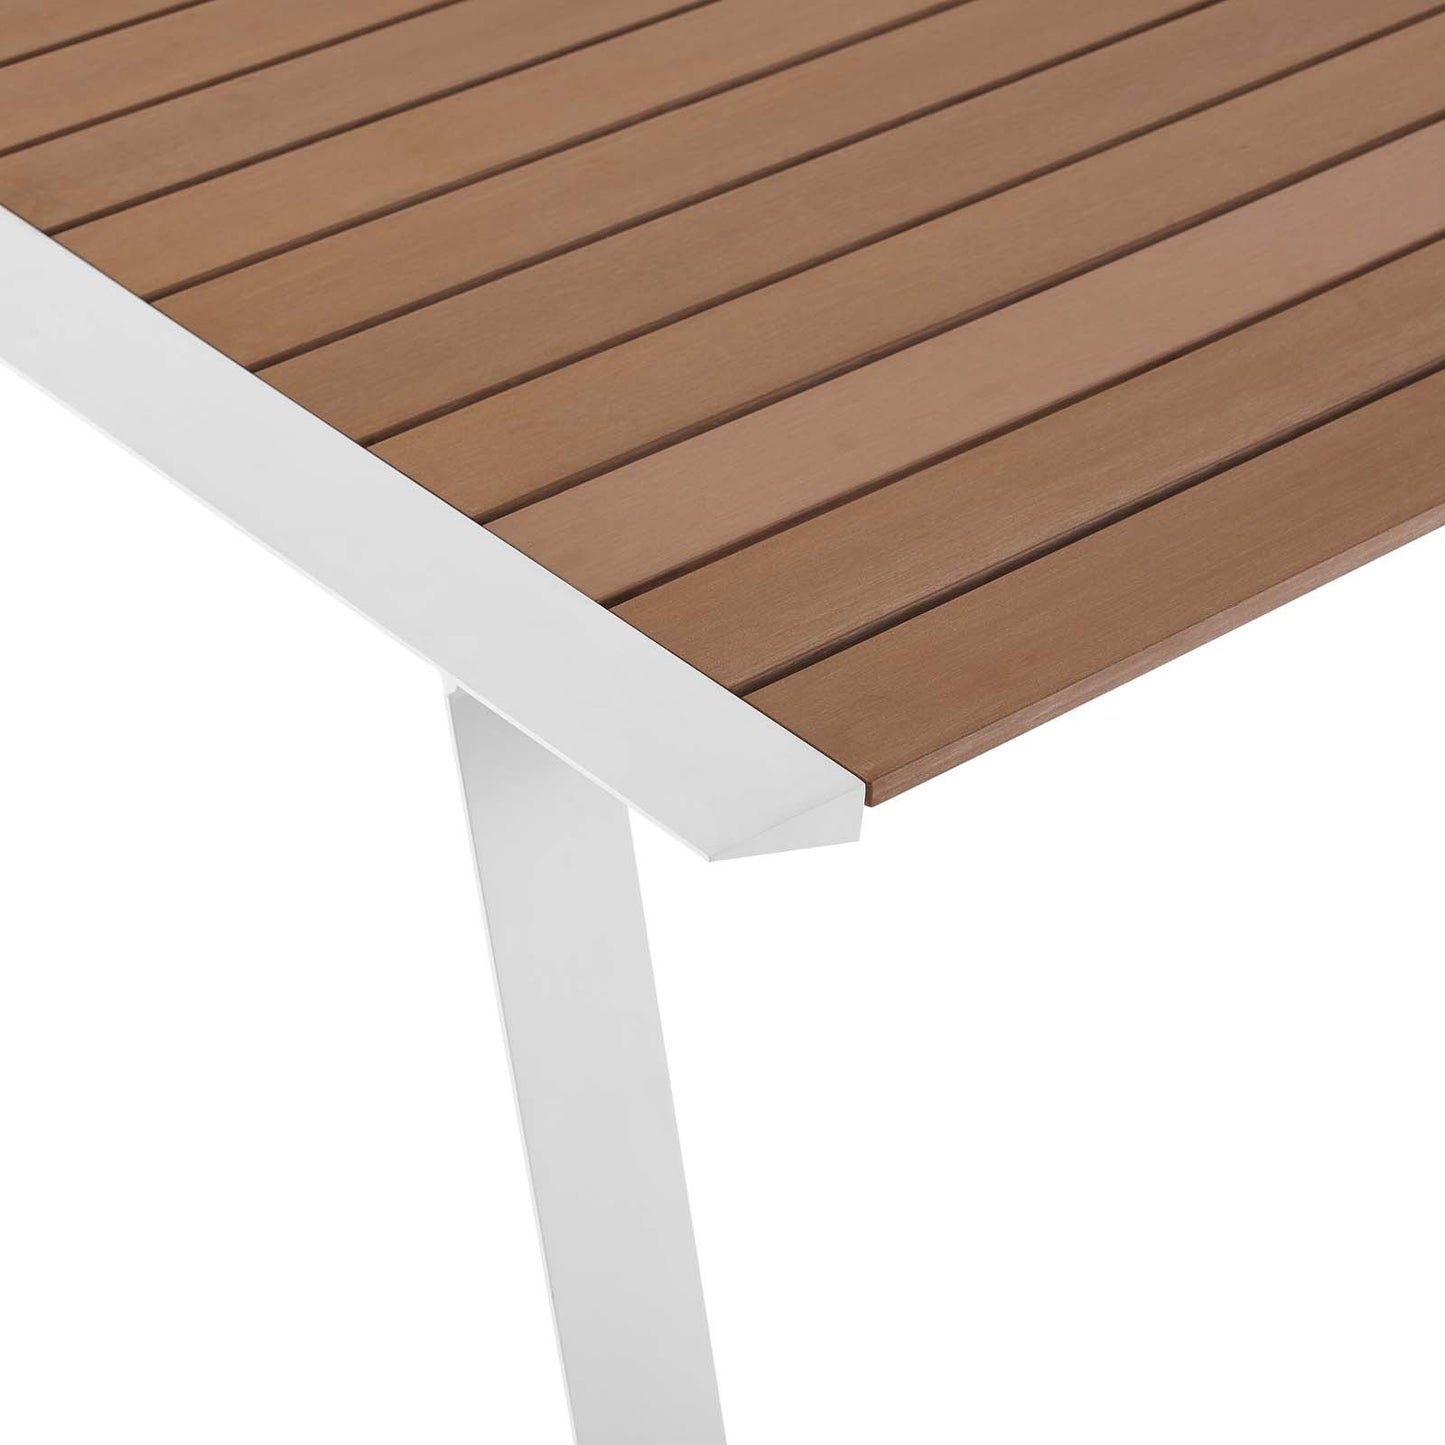 Roanoke 73" Outdoor Patio Aluminum Dining Table White Natural EEI-3572-WHI-NAT